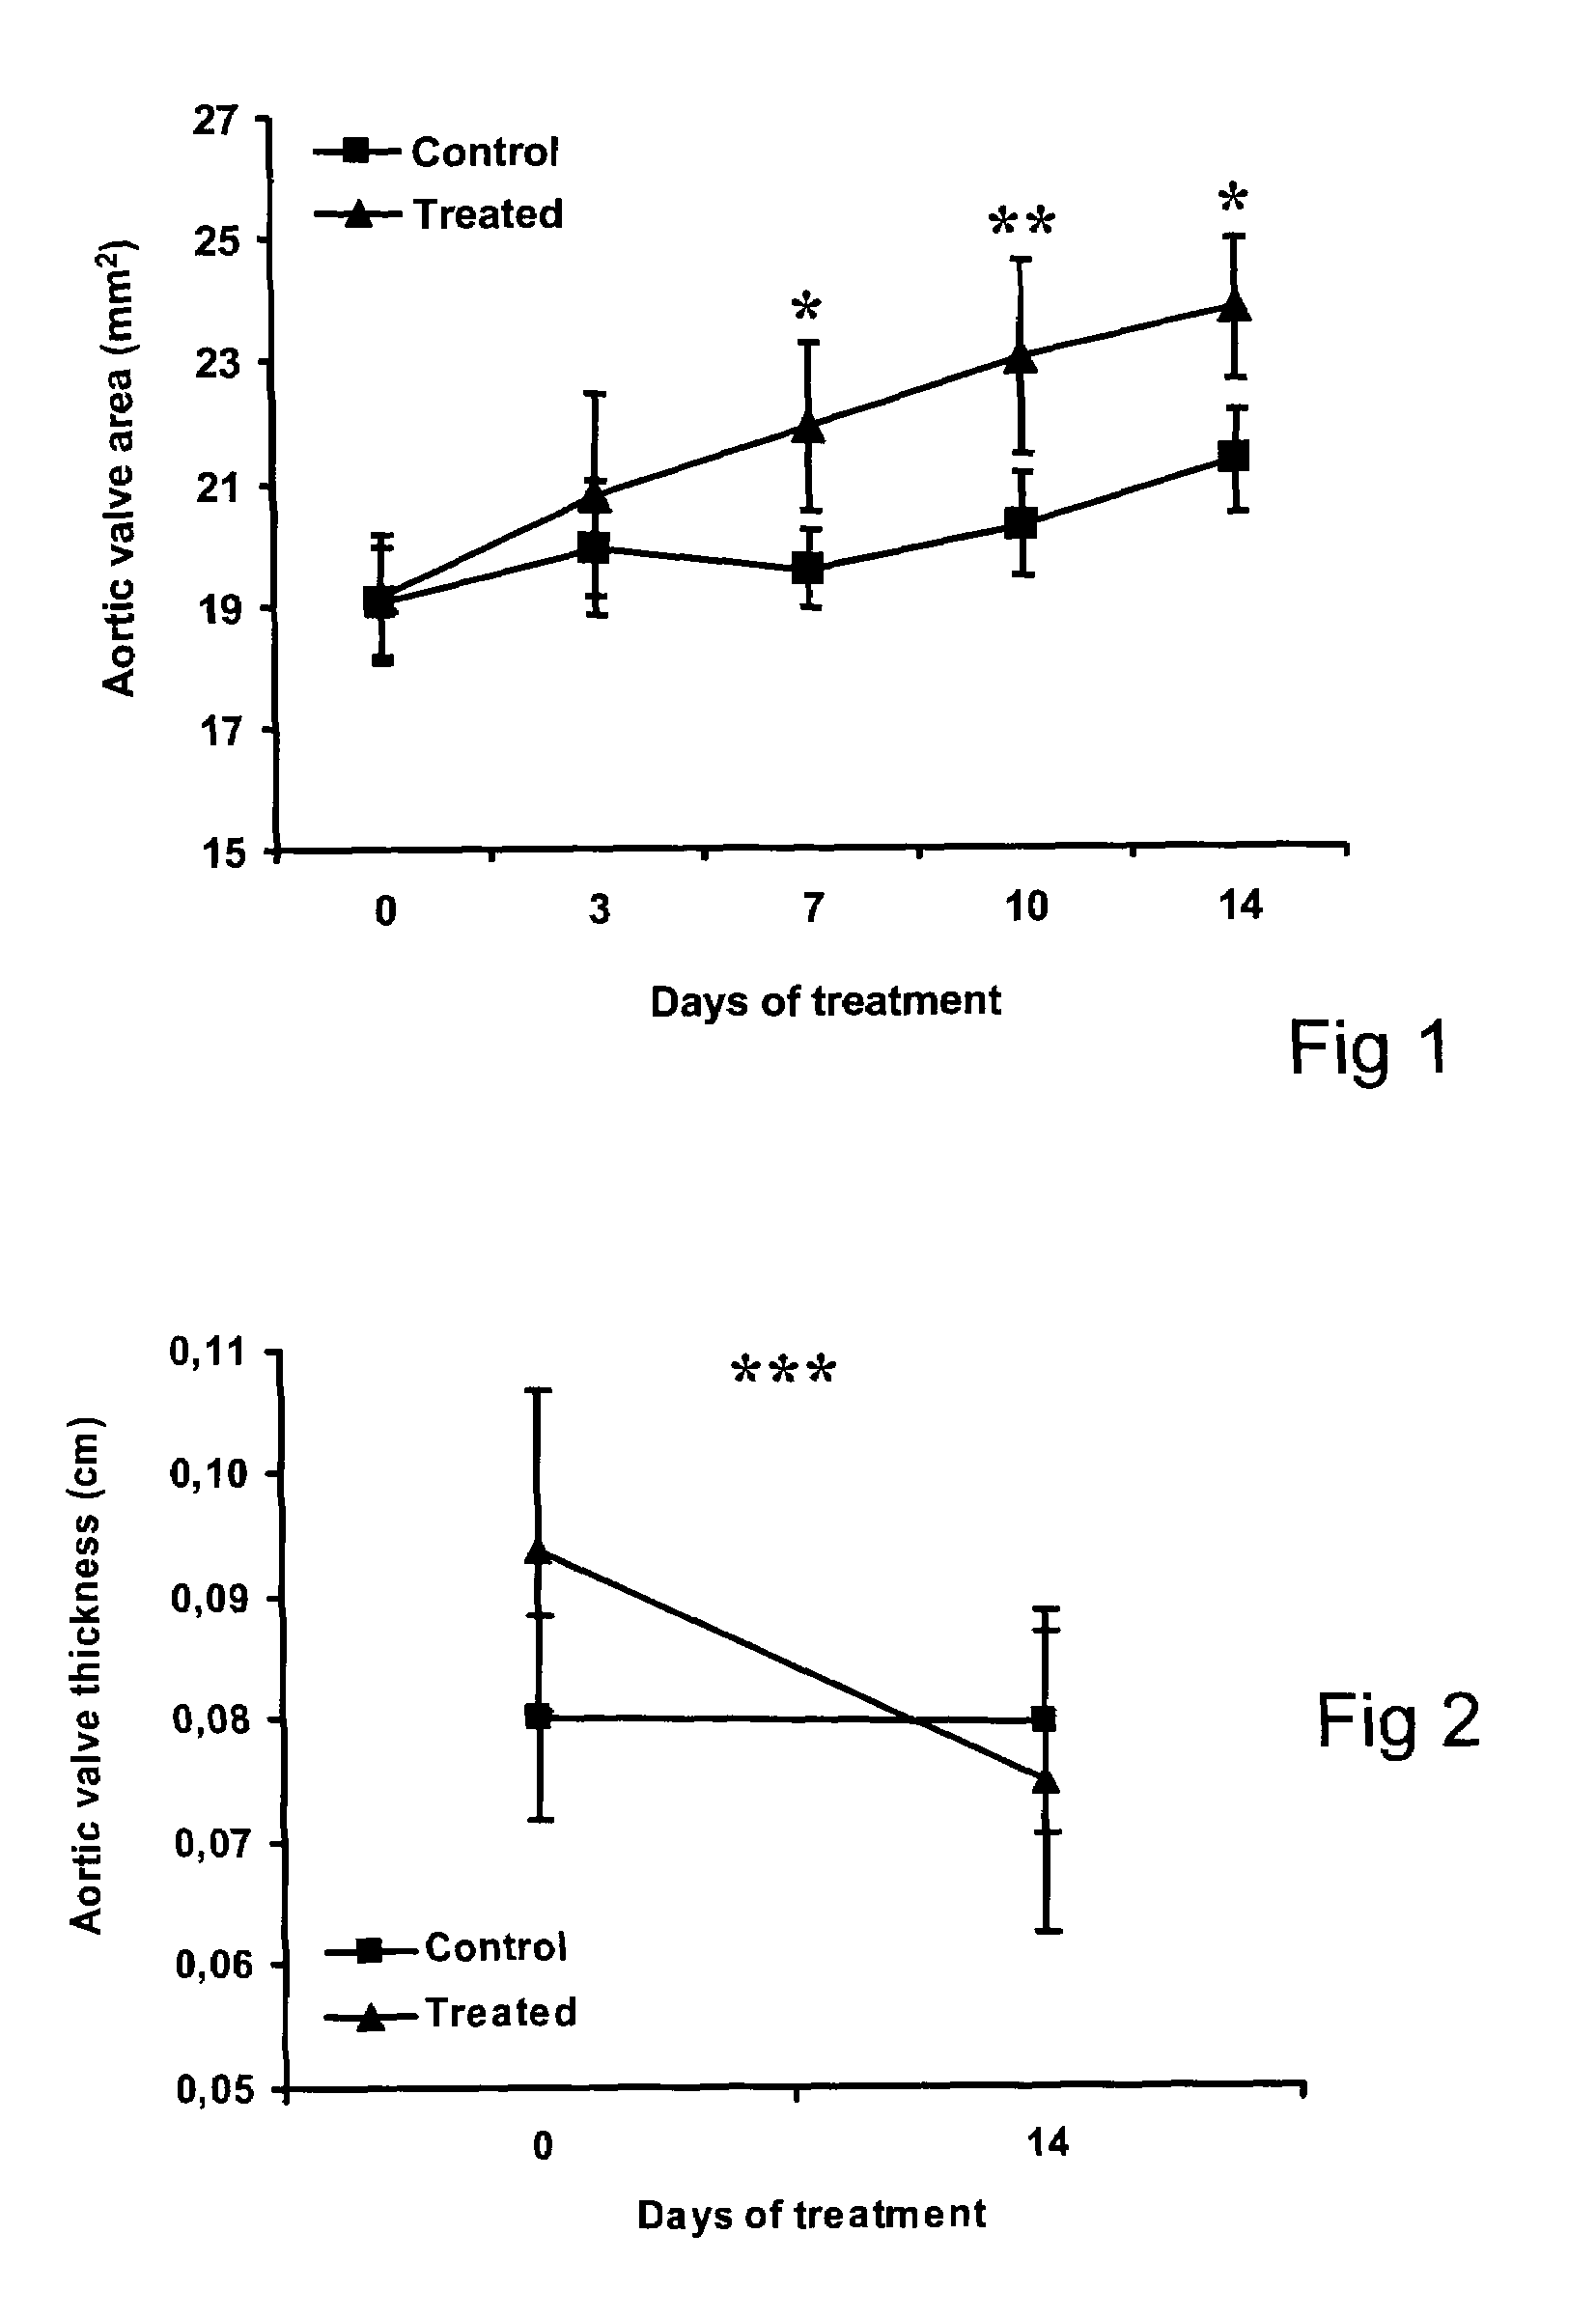 Method for the treatment of valvular disease